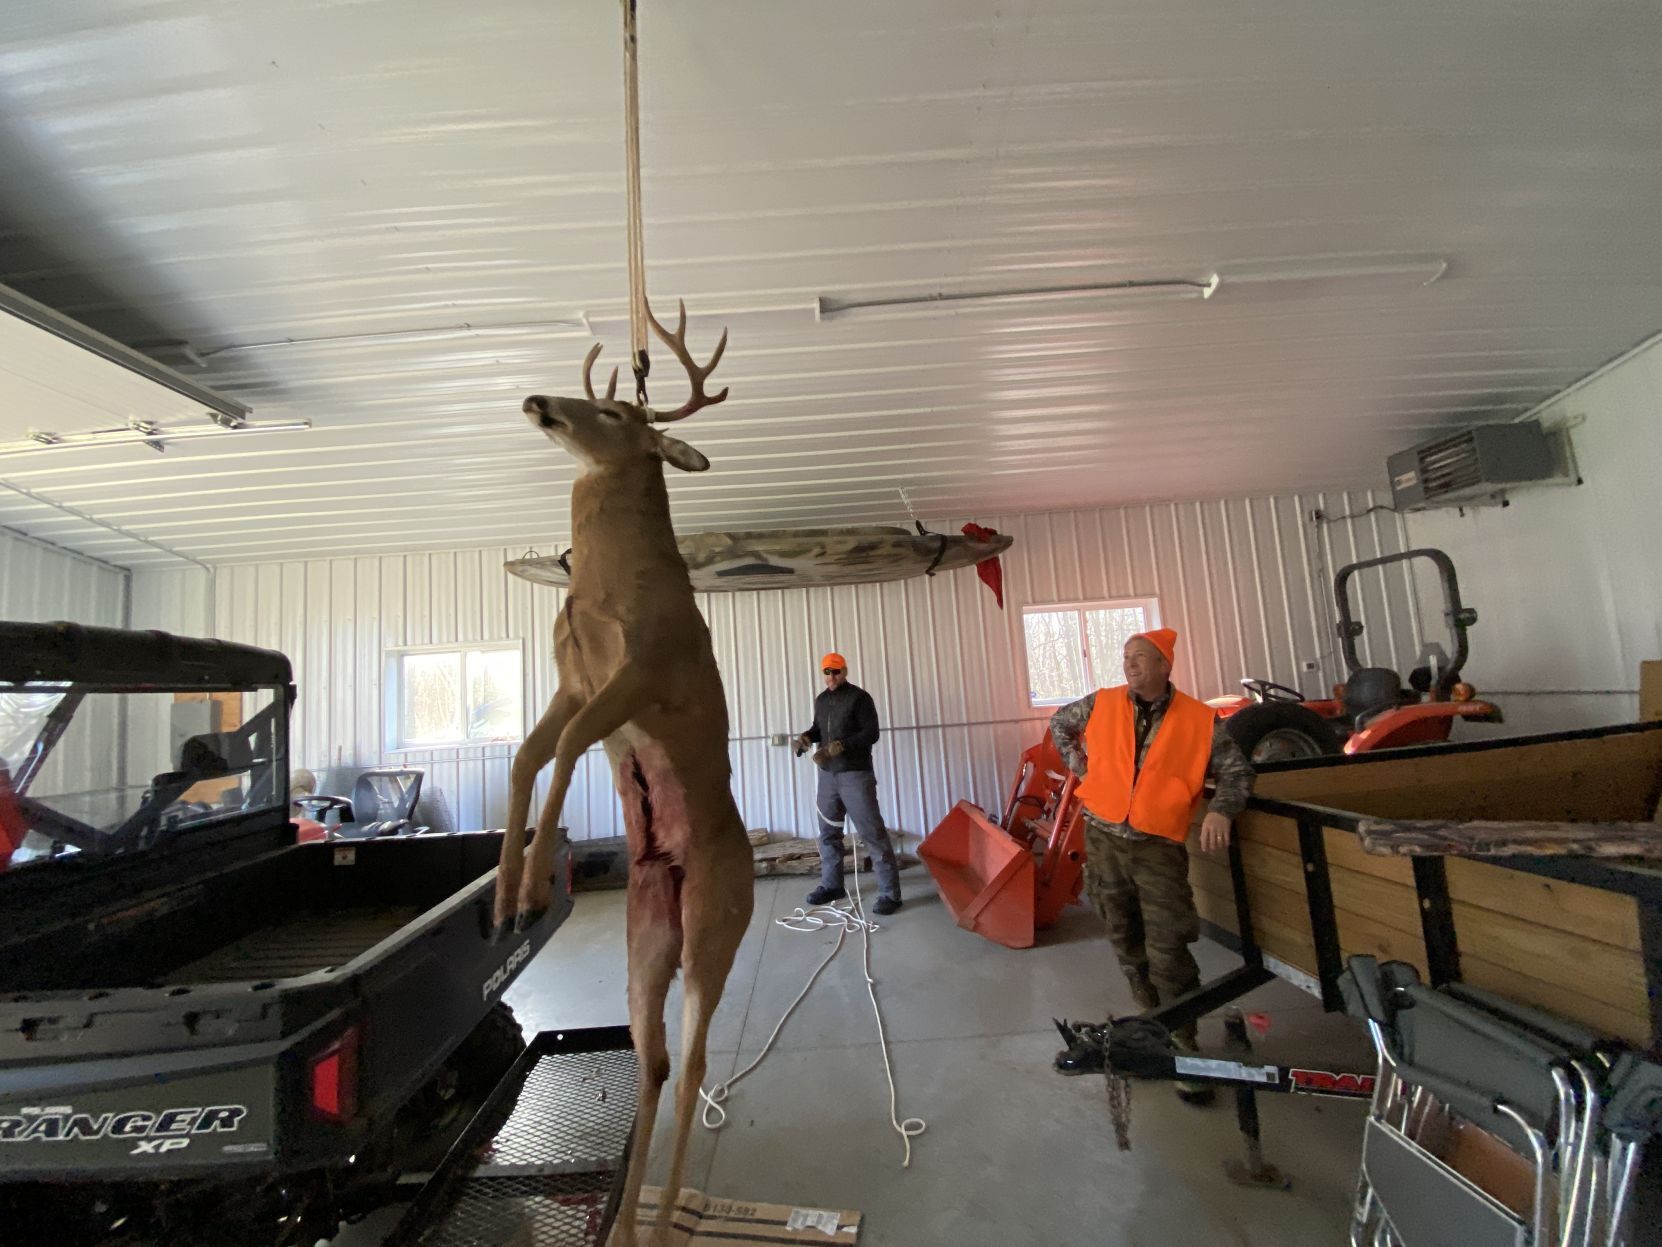 Near perfect weather and COVID-19 bolsters the opening of deer season